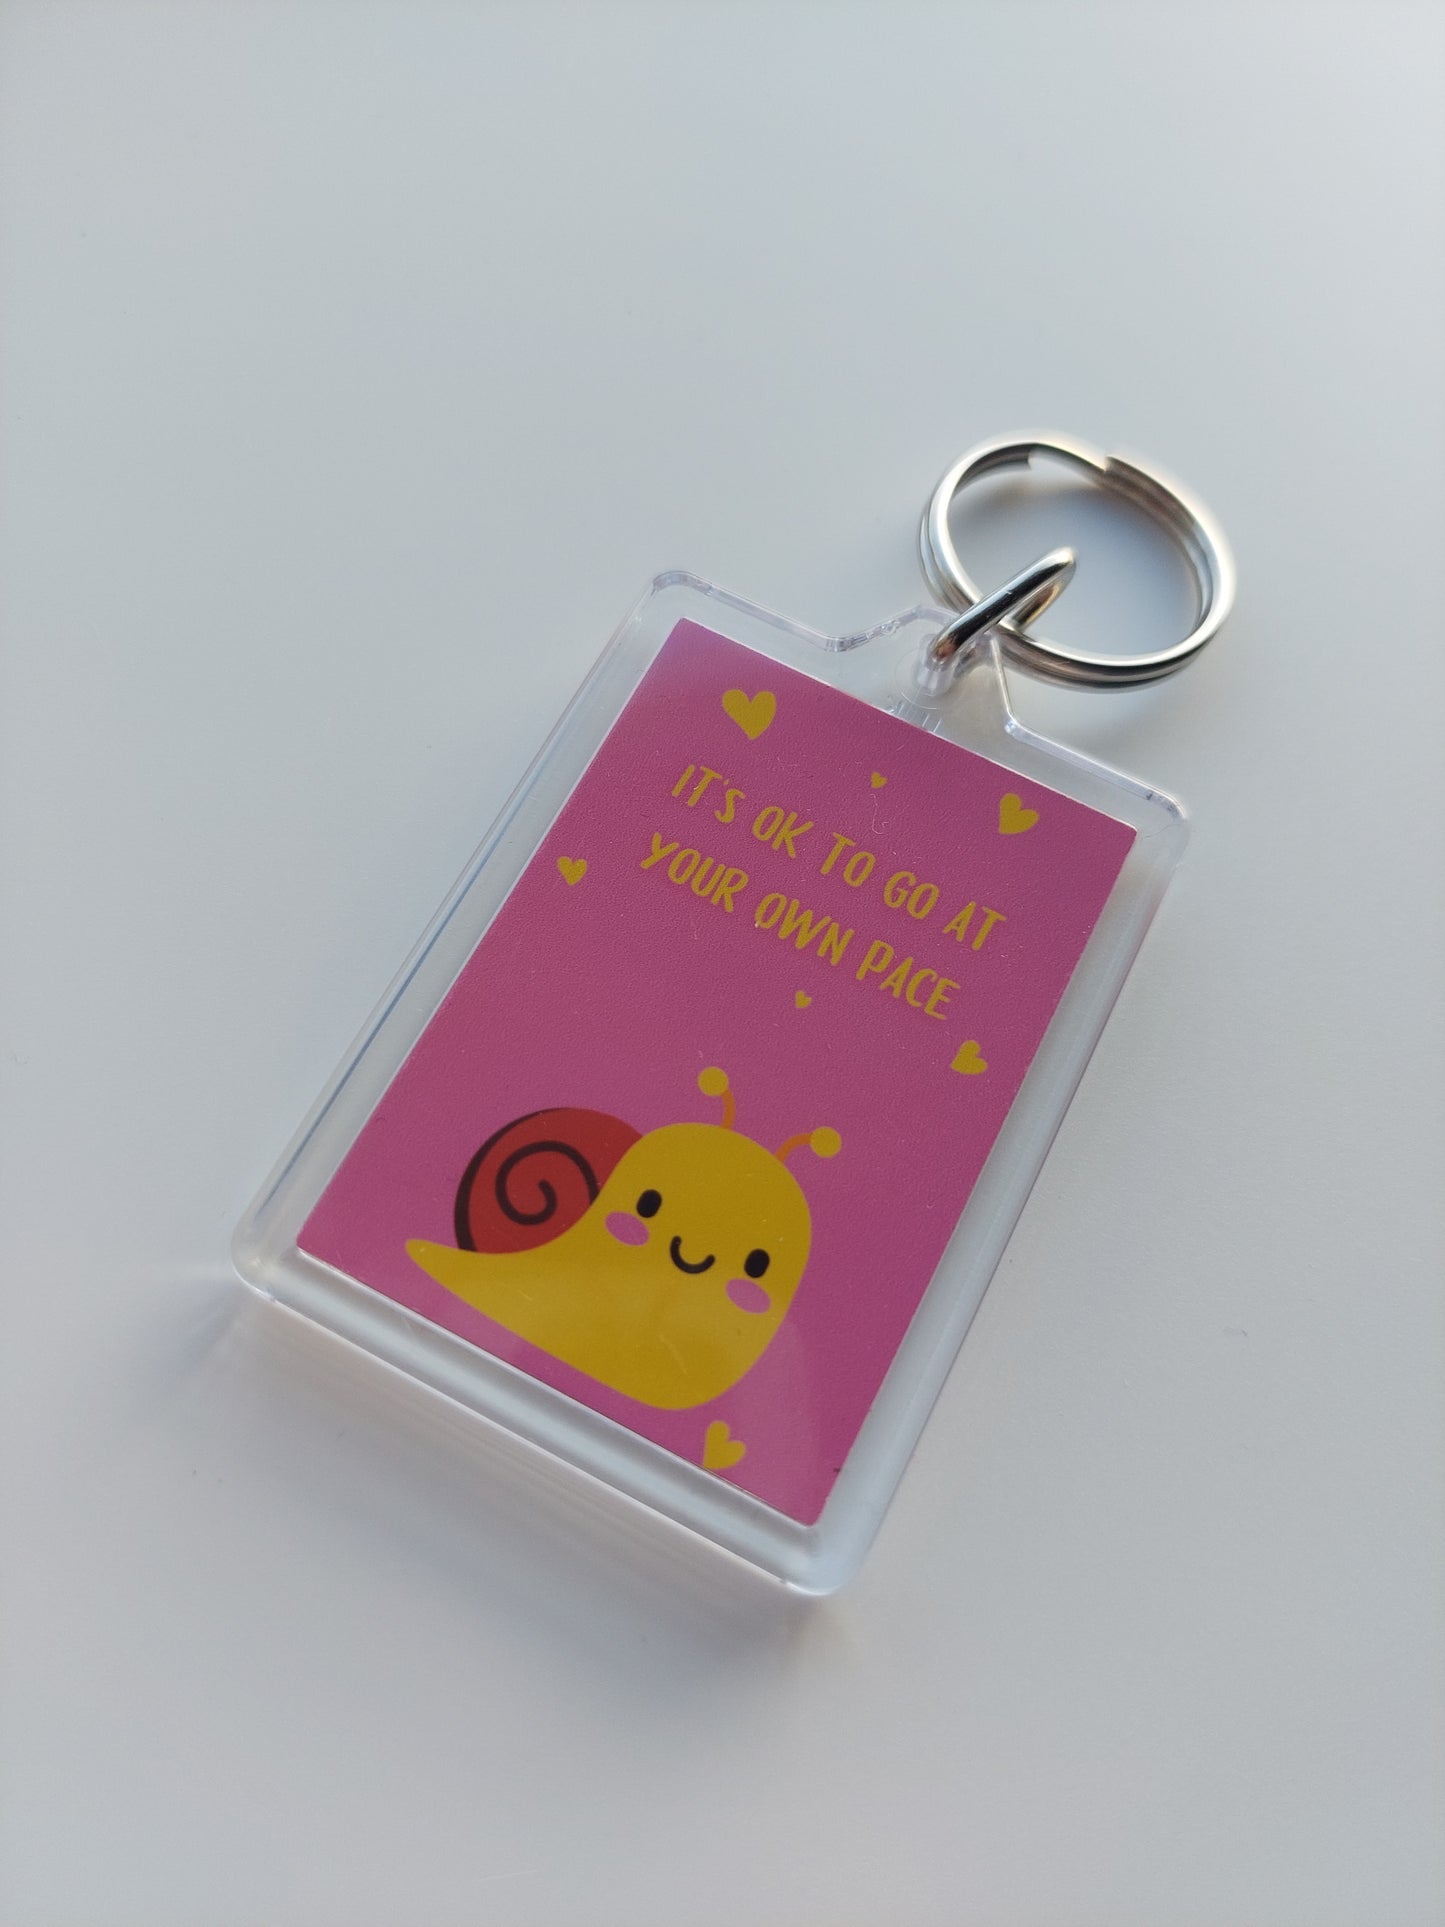 Keyring Gift | It's OK To Go At Your Own Pace | Positive Quote Keyring | Positive Reminder Gift